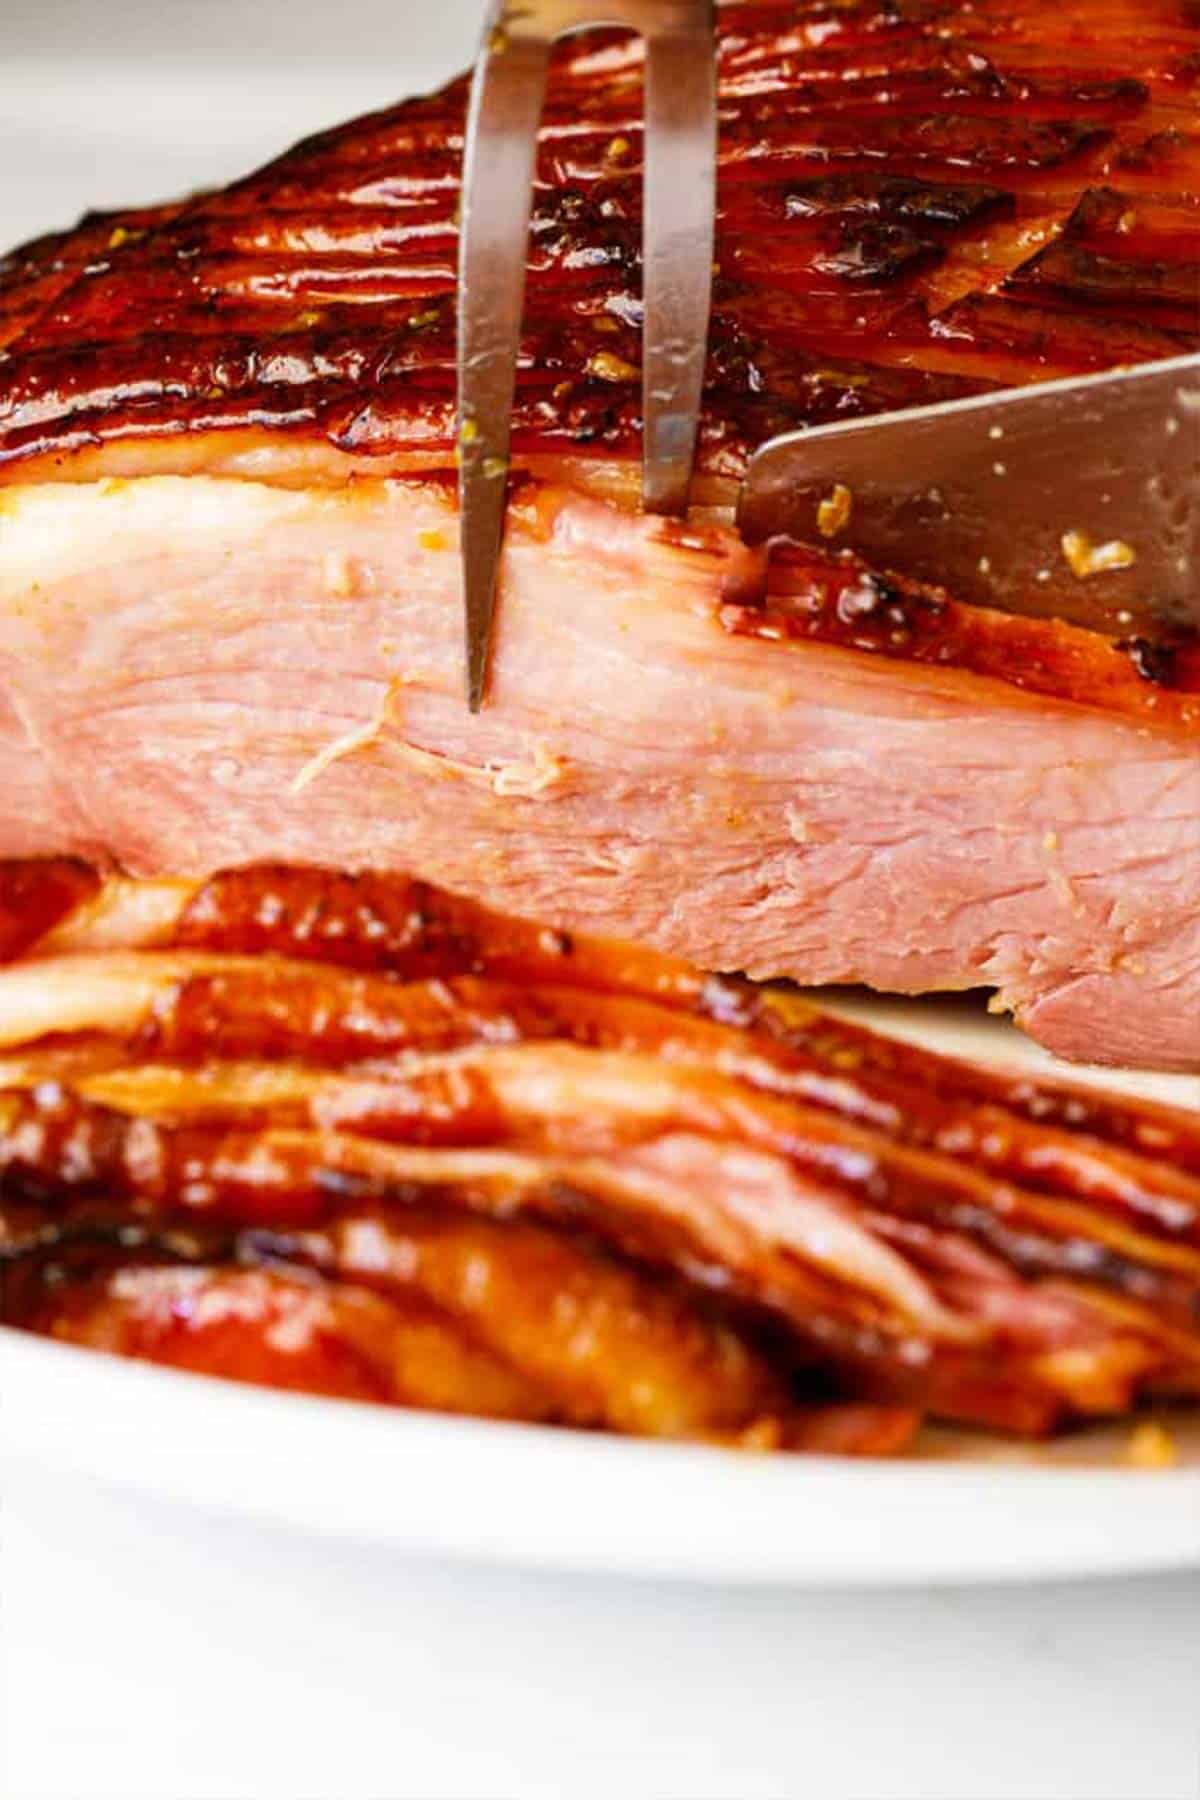 A close up of honey glazed ham being sliced and served